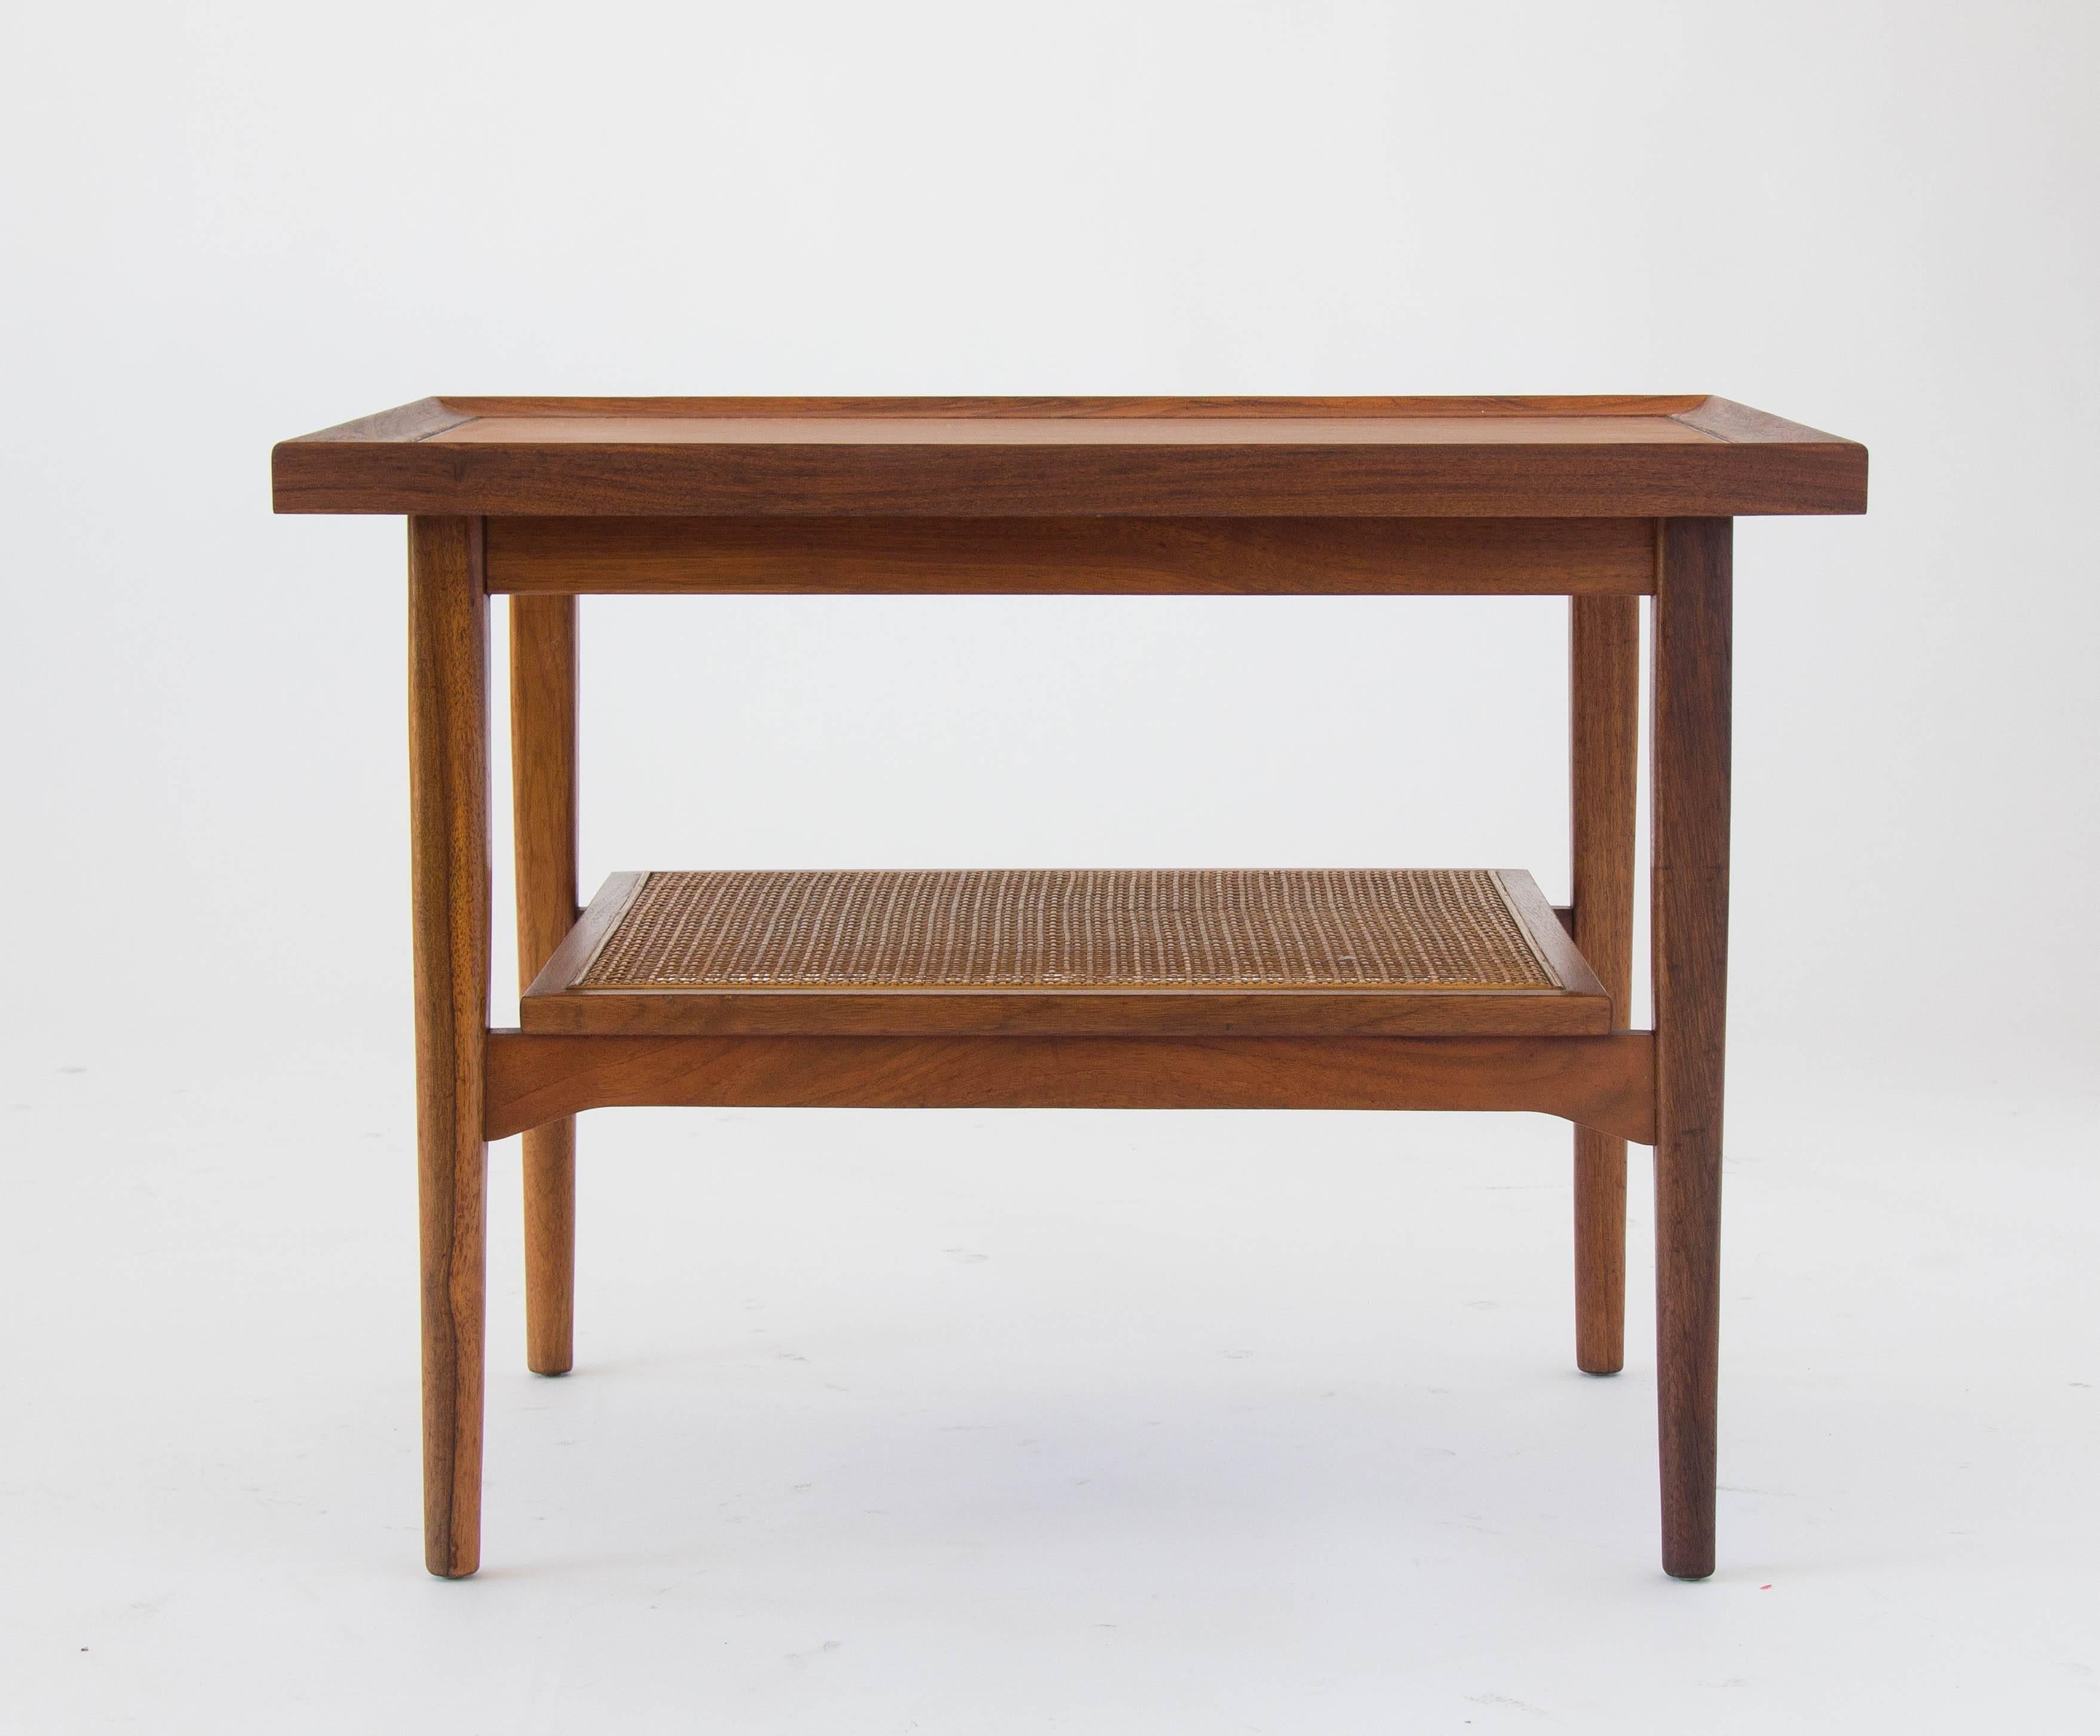 A rectangular side table from Kipp Stewart and Stewart MacDougall’s iconic Declaration collection for Drexel. The walnut tabletop is framed on all sides by end pieces of solid walnut, that create a graduated lip. A smaller shelf with a walnut frame